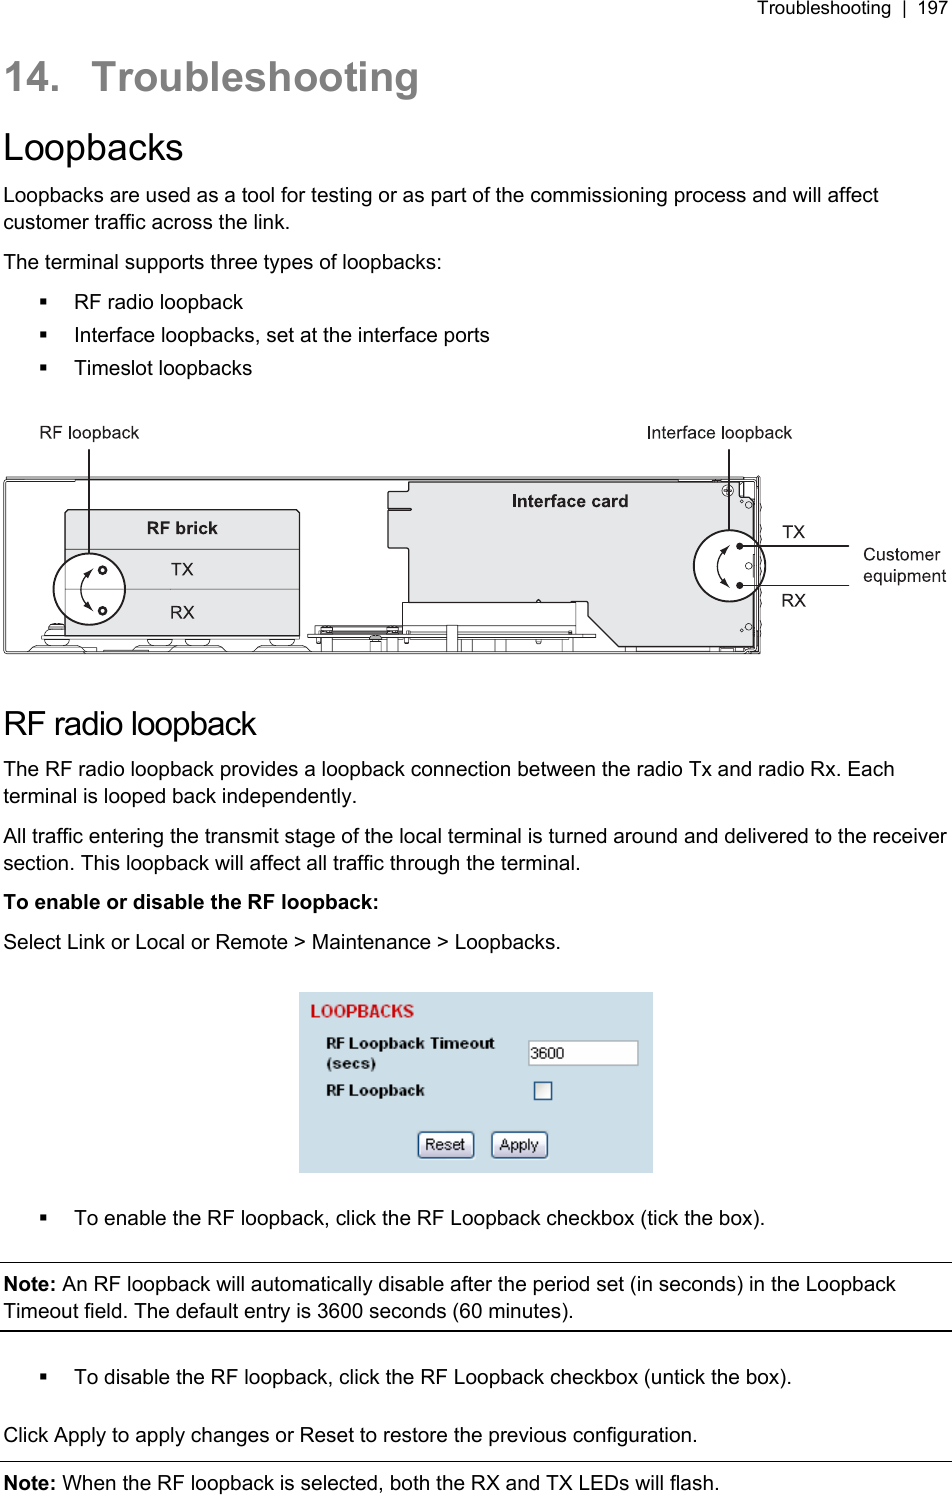 Troubleshooting  |  197   14. Troubleshooting Loopbacks Loopbacks are used as a tool for testing or as part of the commissioning process and will affect customer traffic across the link. The terminal supports three types of loopbacks:    RF radio loopback   Interface loopbacks, set at the interface ports  Timeslot loopbacks    RF radio loopback The RF radio loopback provides a loopback connection between the radio Tx and radio Rx. Each terminal is looped back independently. All traffic entering the transmit stage of the local terminal is turned around and delivered to the receiver section. This loopback will affect all traffic through the terminal. To enable or disable the RF loopback: Select Link or Local or Remote &gt; Maintenance &gt; Loopbacks.      To enable the RF loopback, click the RF Loopback checkbox (tick the box).  Note: An RF loopback will automatically disable after the period set (in seconds) in the Loopback Timeout field. The default entry is 3600 seconds (60 minutes).    To disable the RF loopback, click the RF Loopback checkbox (untick the box).  Click Apply to apply changes or Reset to restore the previous configuration. Note: When the RF loopback is selected, both the RX and TX LEDs will flash. 